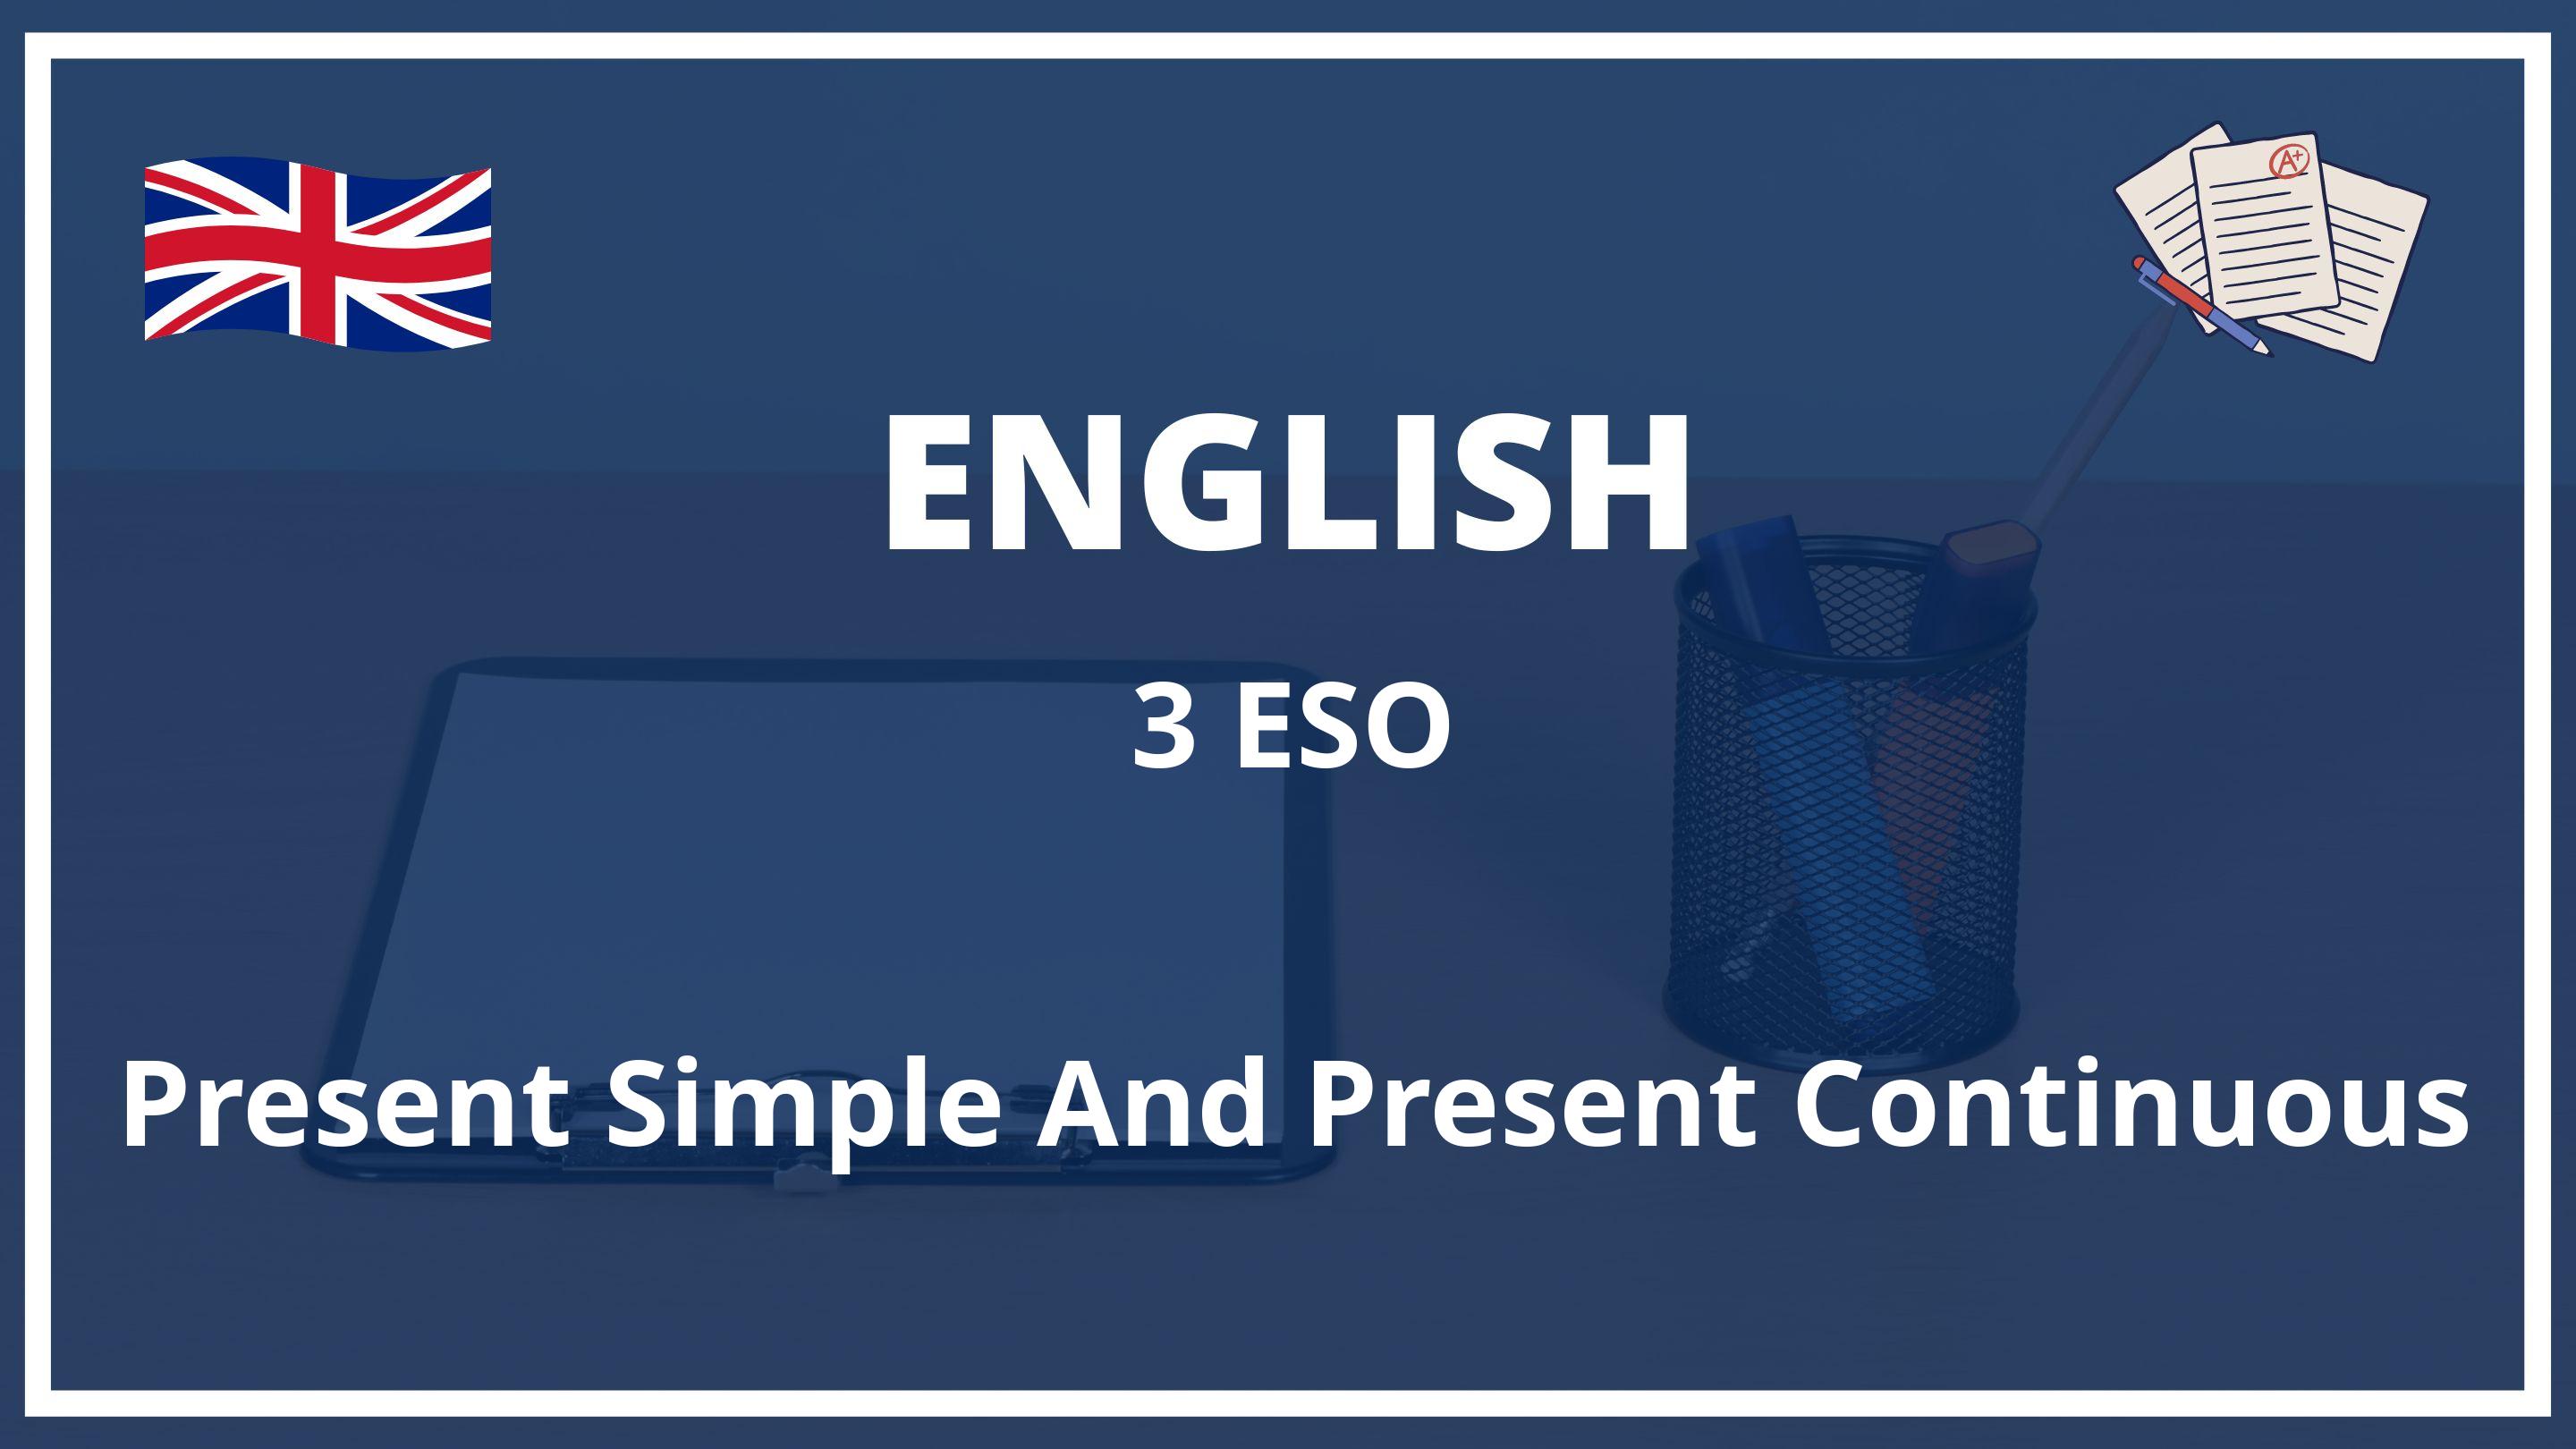 Present Simple And Present Continuous 3 ESO